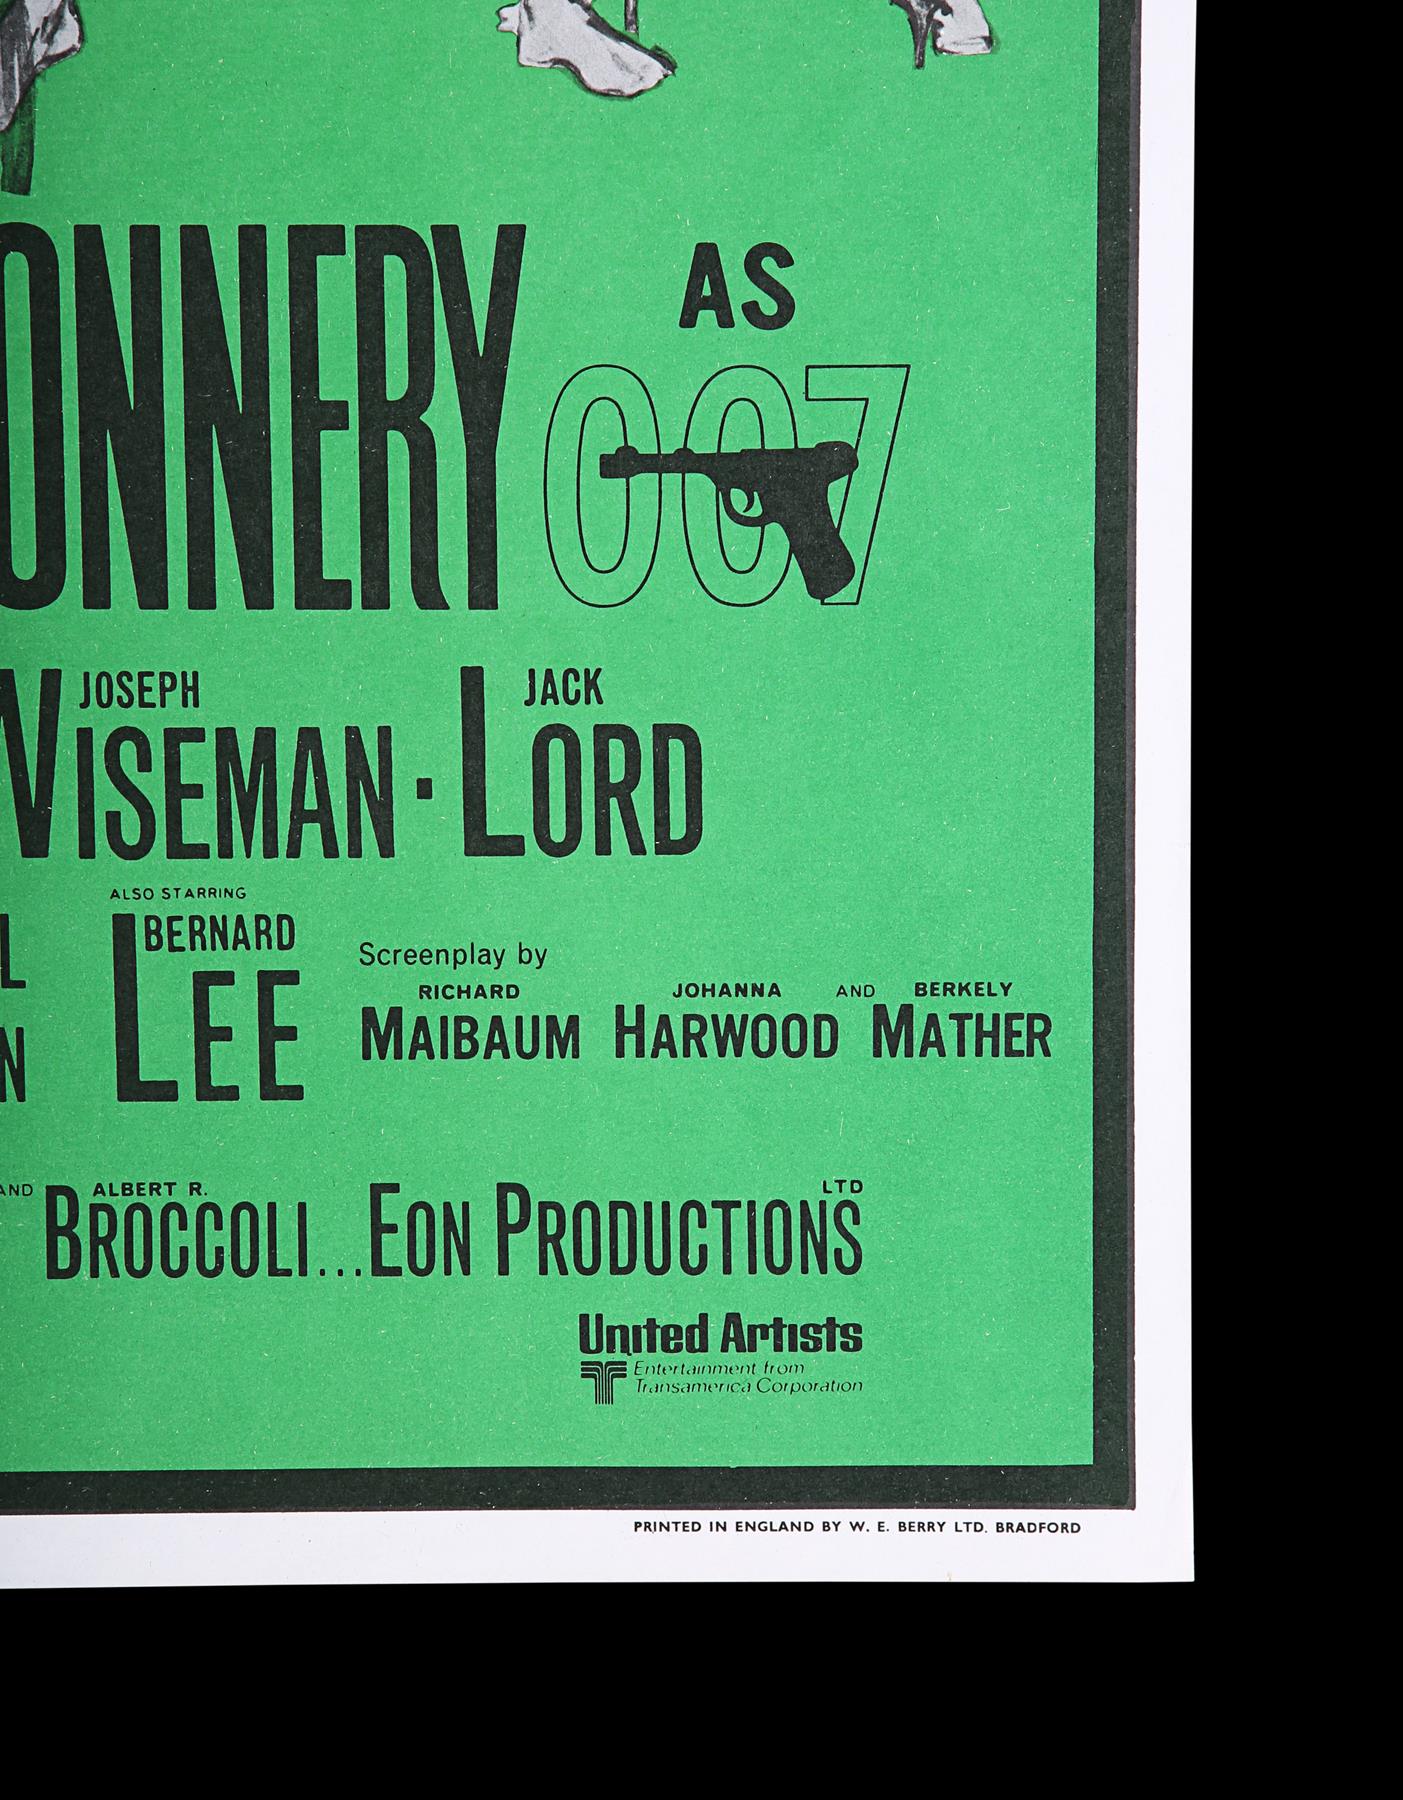 DR. NO (1962) - UK Quad Double-Crown Poster, 1968 Re-Release - Image 5 of 6